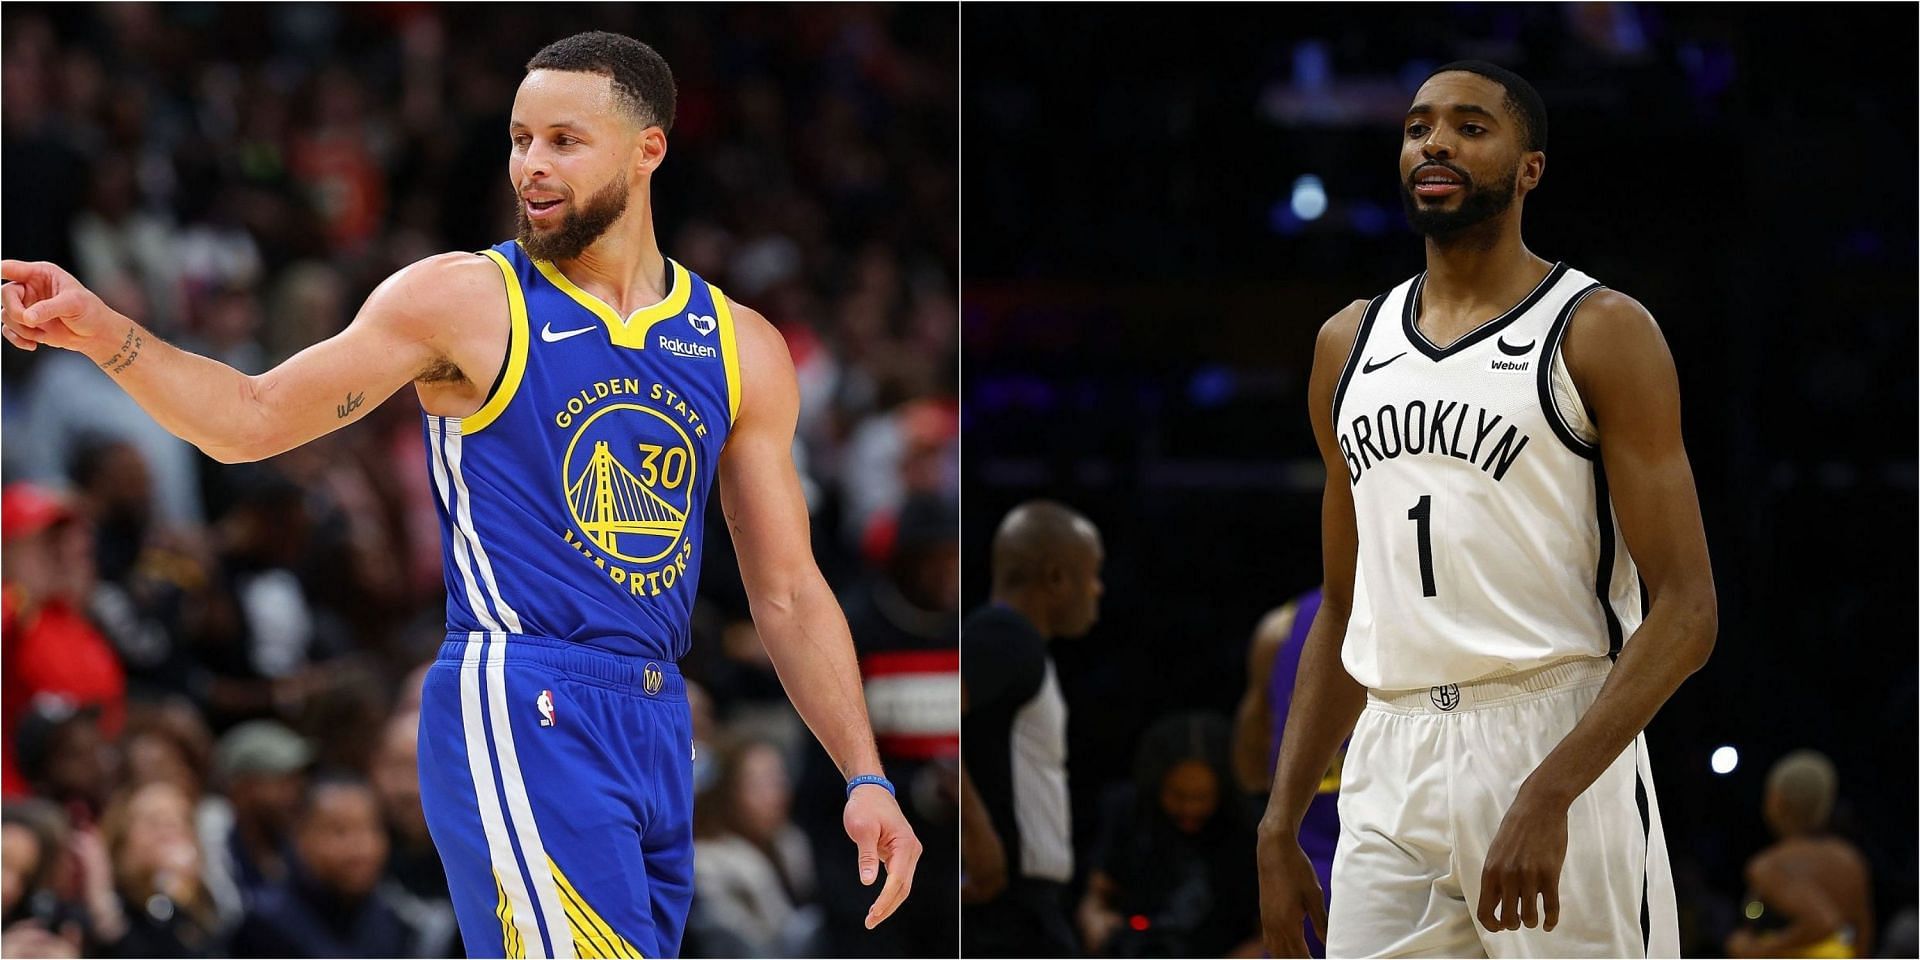 Golden State Warriors vs Brooklyn Nets starting lineups and depth charts